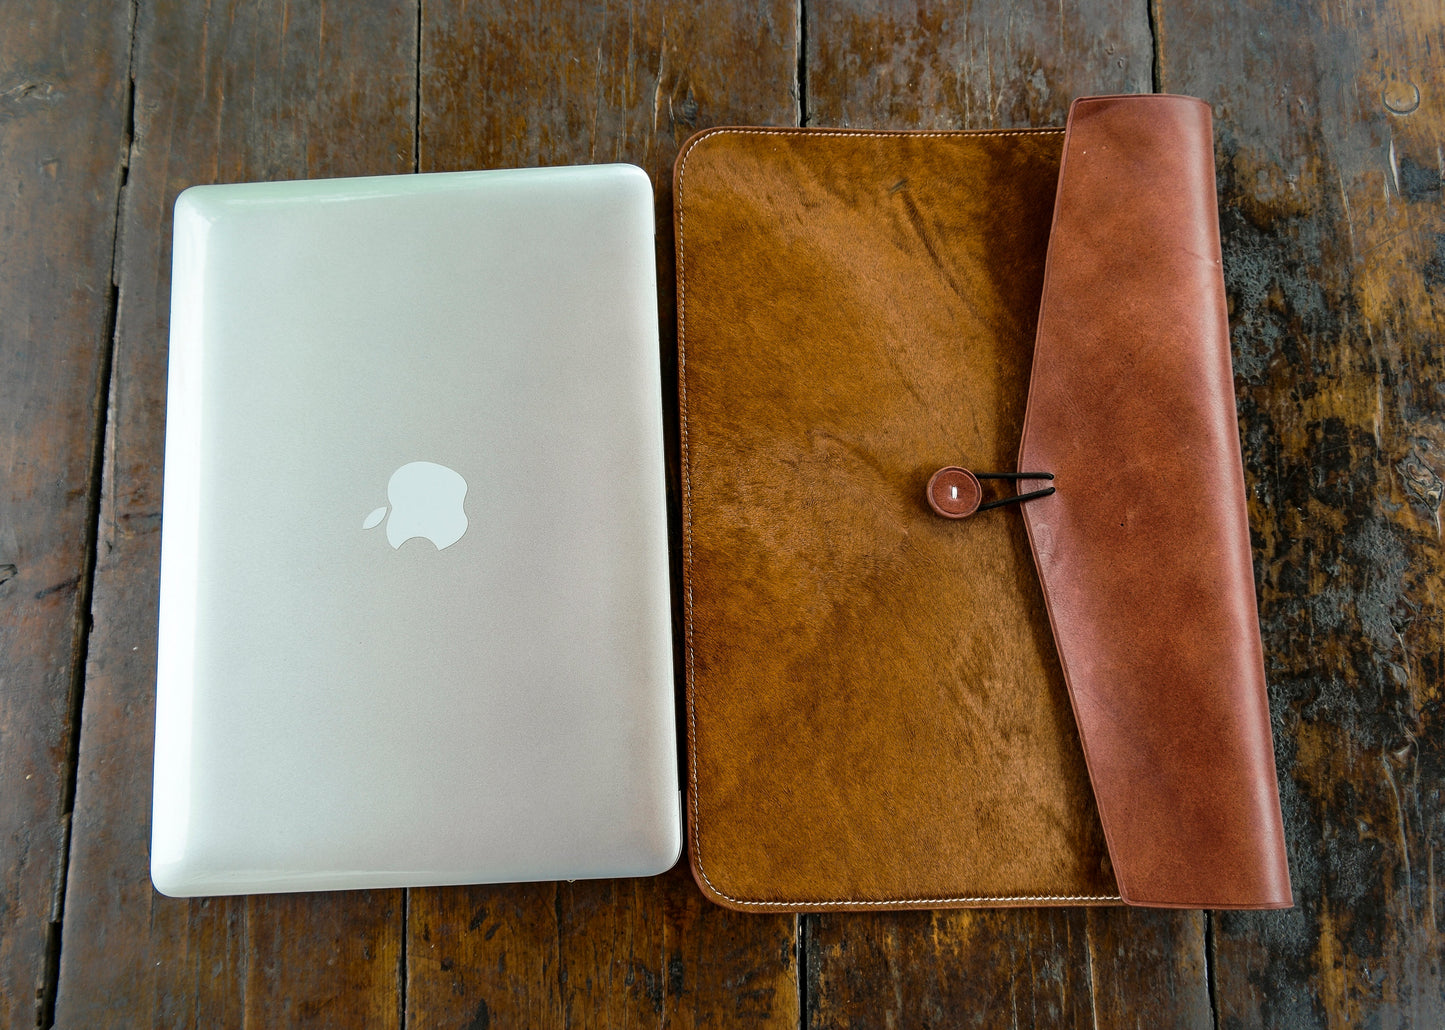 Leather laptop cover pattern/ Leather Laptop Carrying Cases & Sleeves pattern/Leather laptop bag pattern Laptop Case pattern Leather MacBook case/sleeve